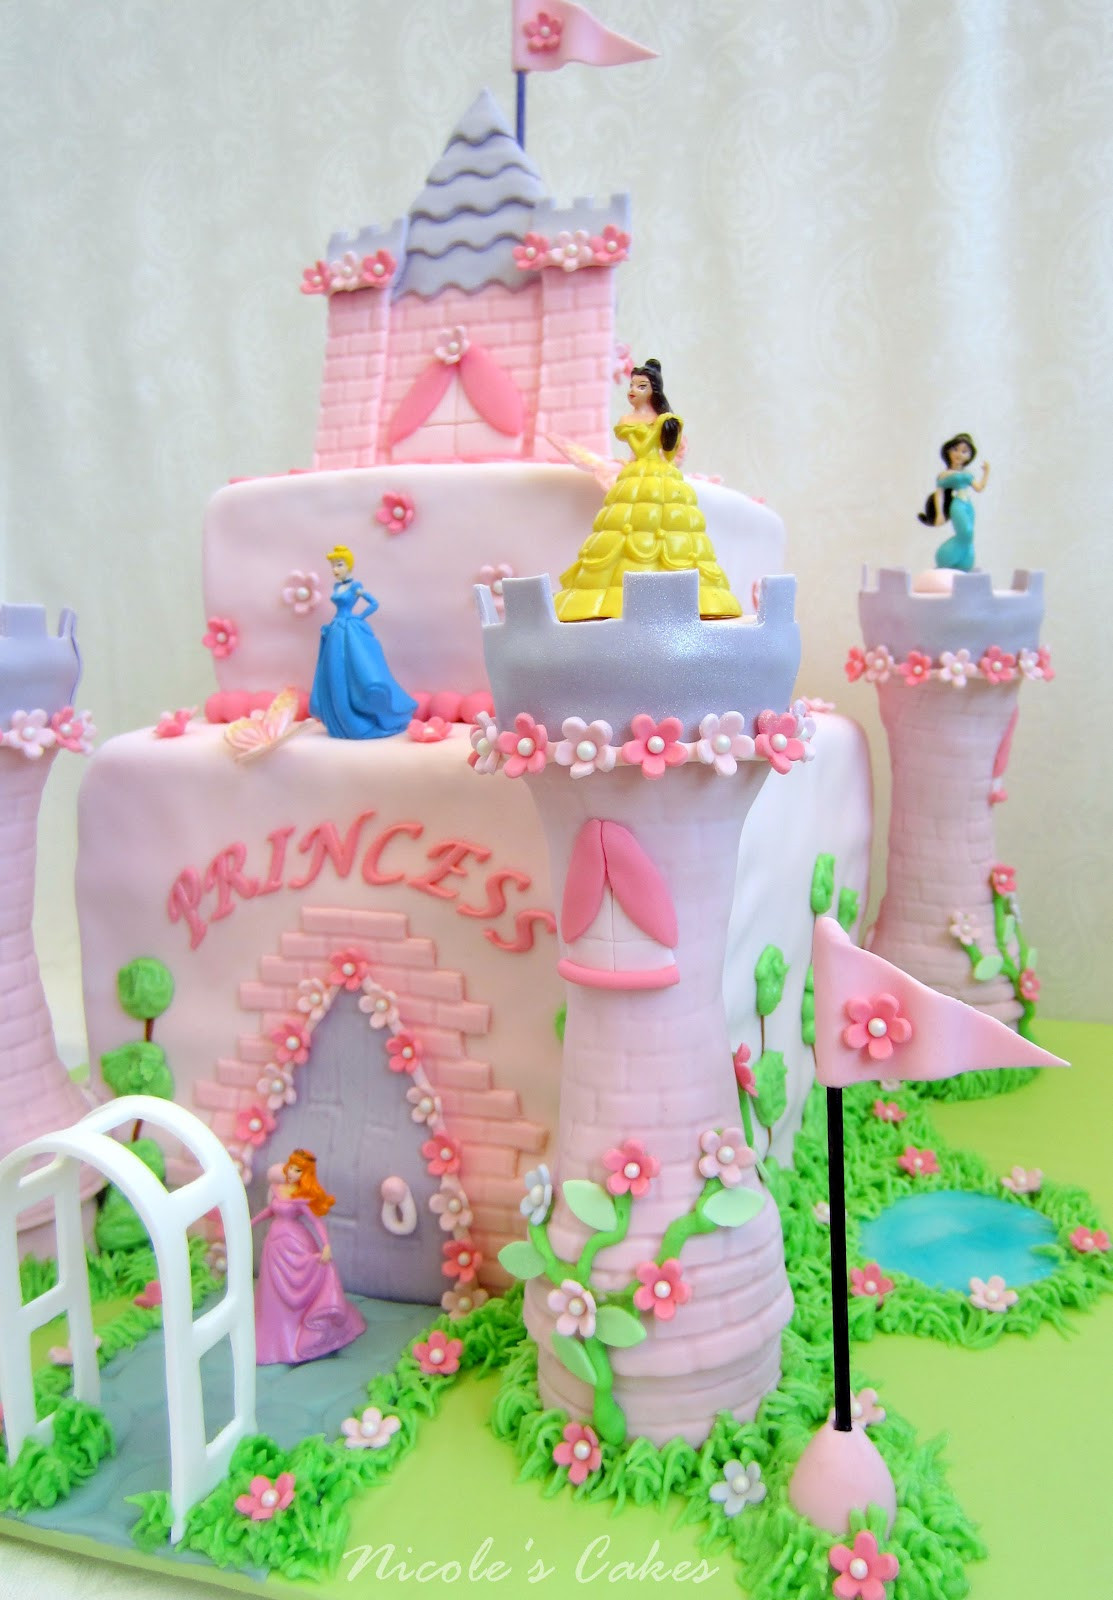 Castle Birthday Cake
 Confections Cakes & Creations Princess Castle Cake